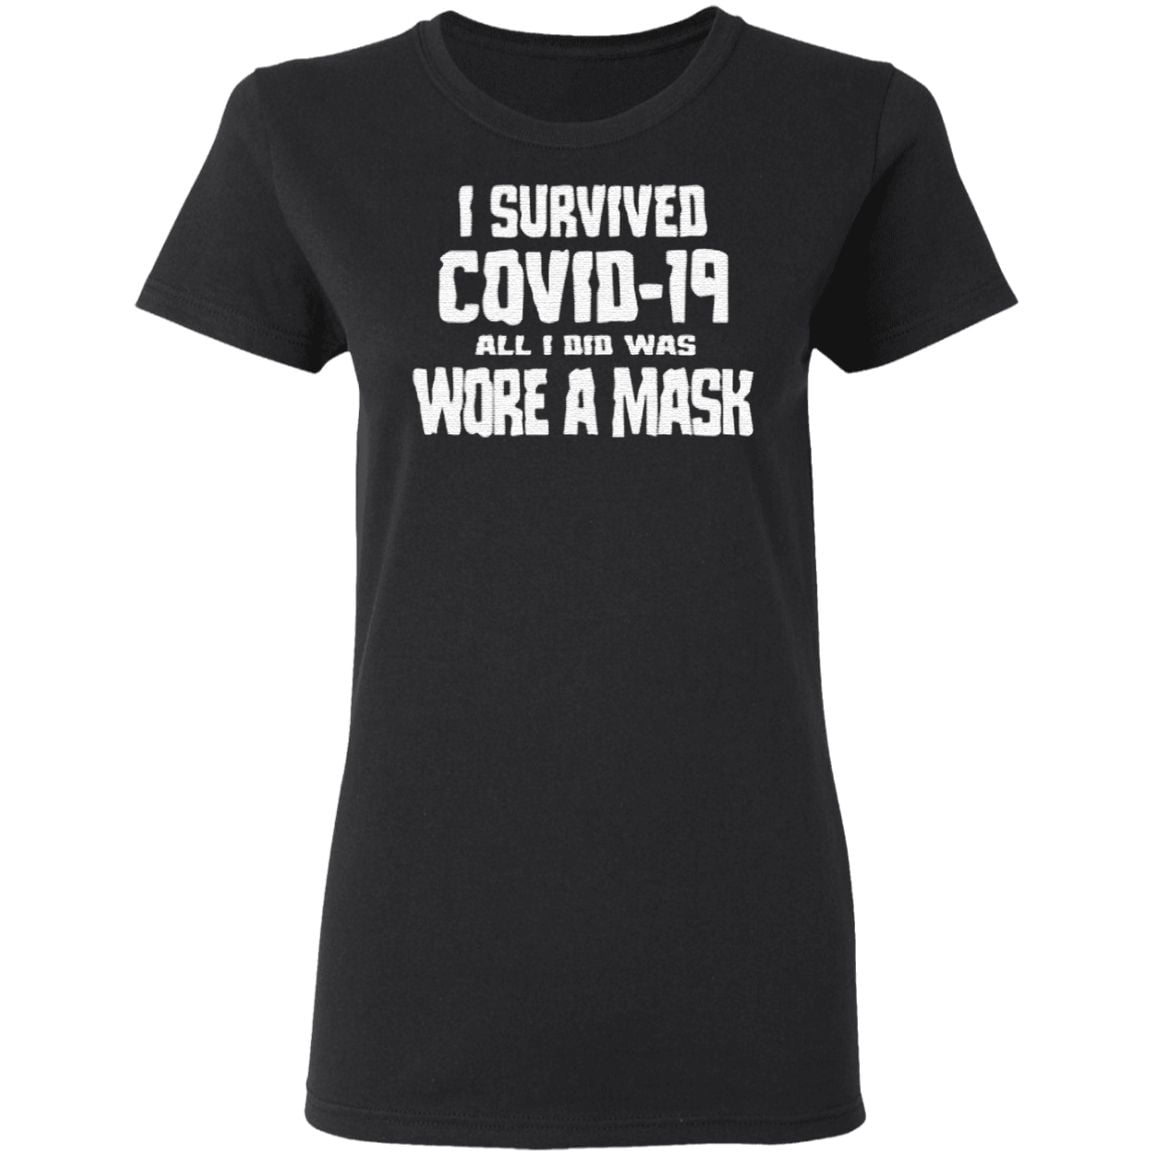 i survived covid-19 all i did was wore a mask T-Shirt